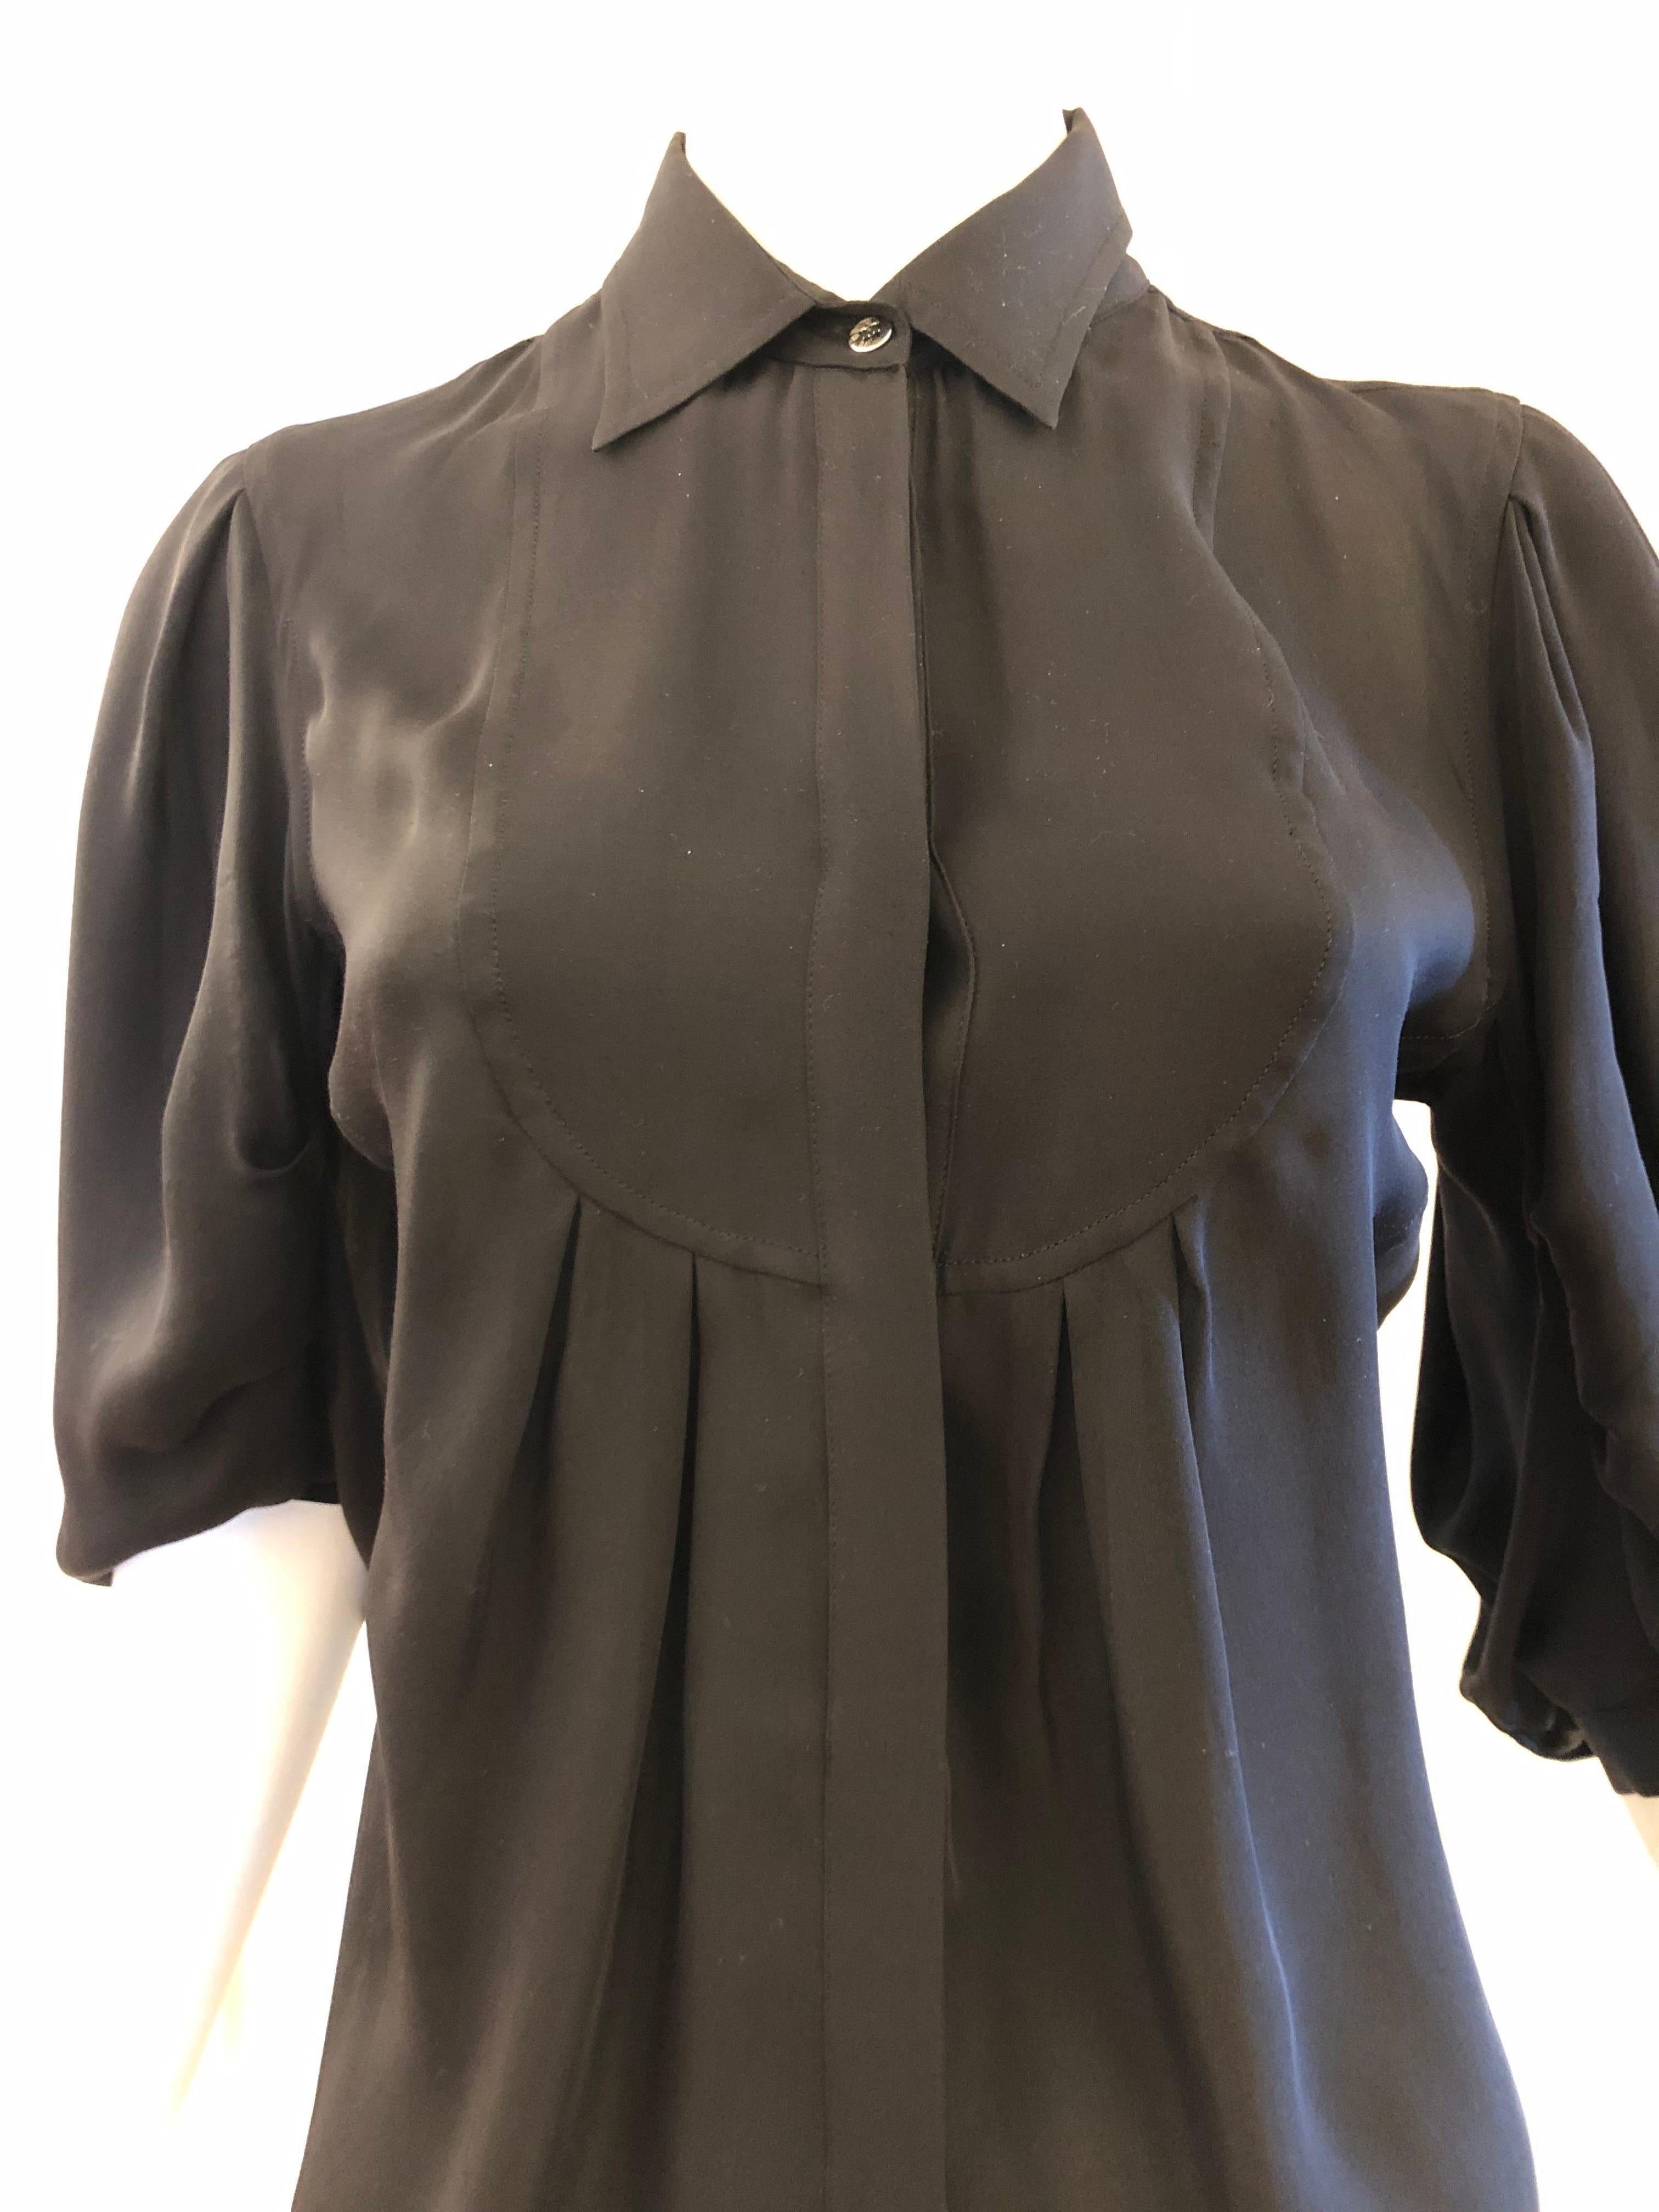 There are so many elements to this blouse including a bib front with pleating; hidden button closure all the way down the front; 3/4 balloon sleeves with light pleating and a beautiful light silk.